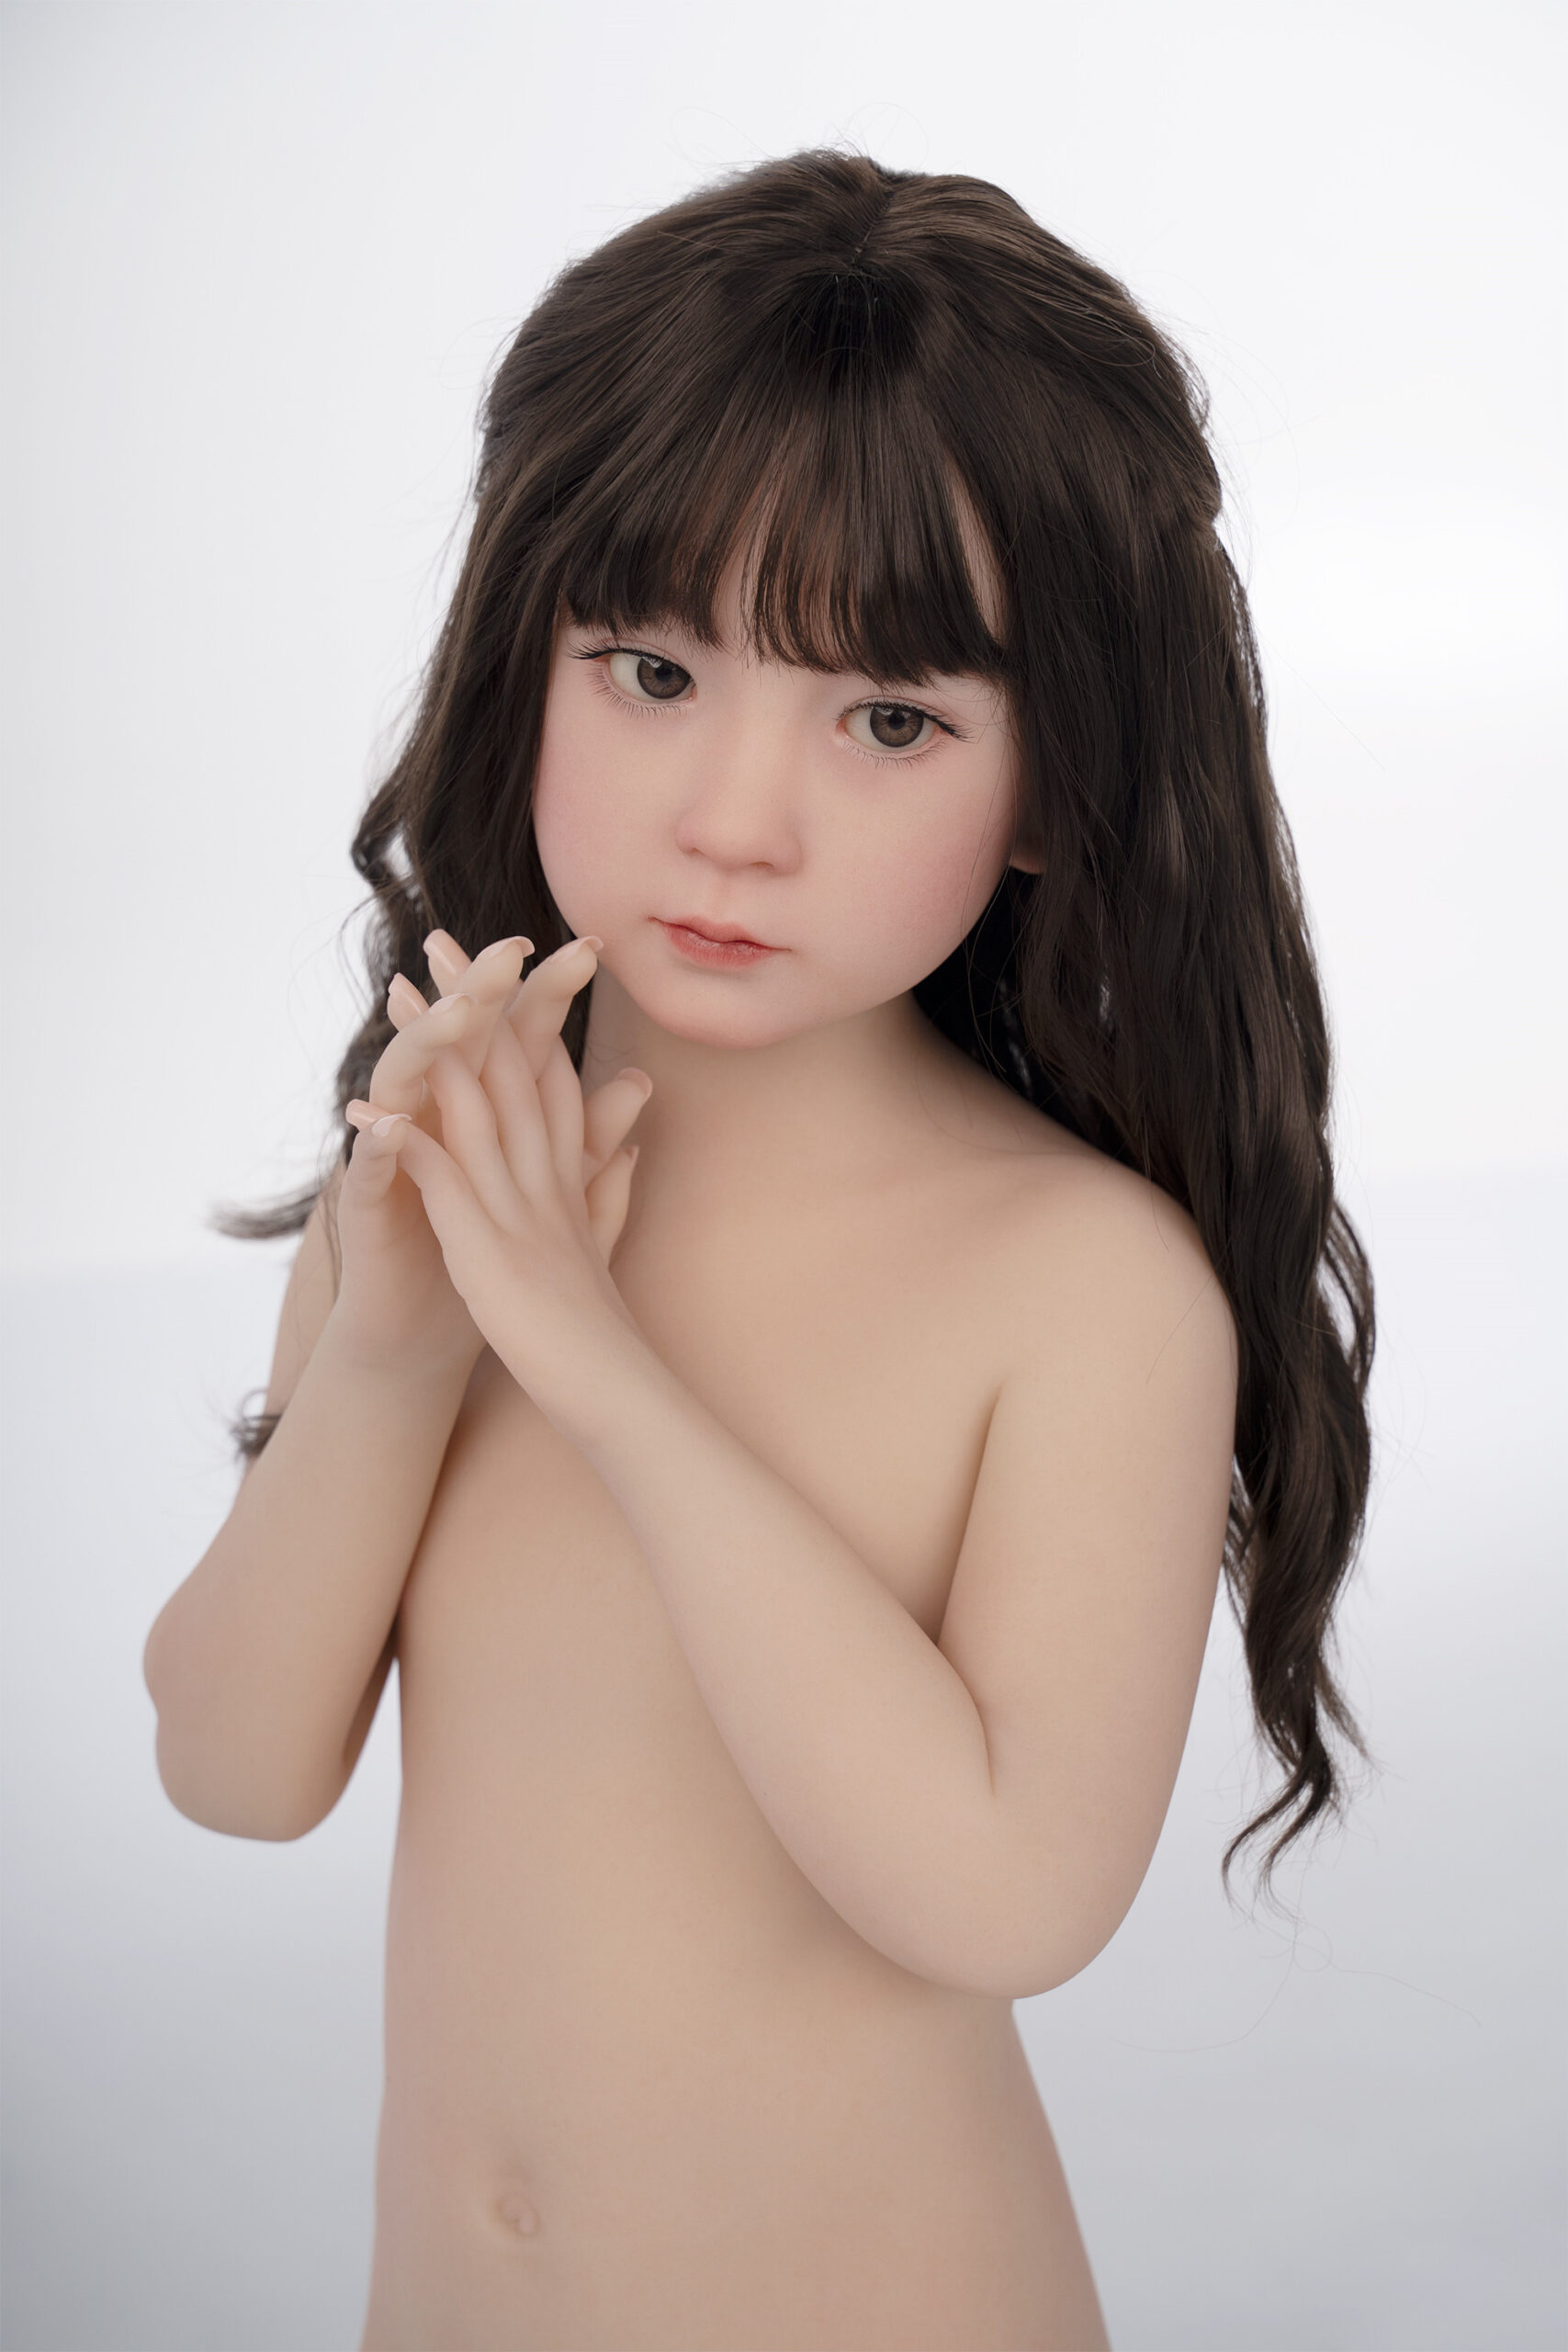 small young girl sex doll